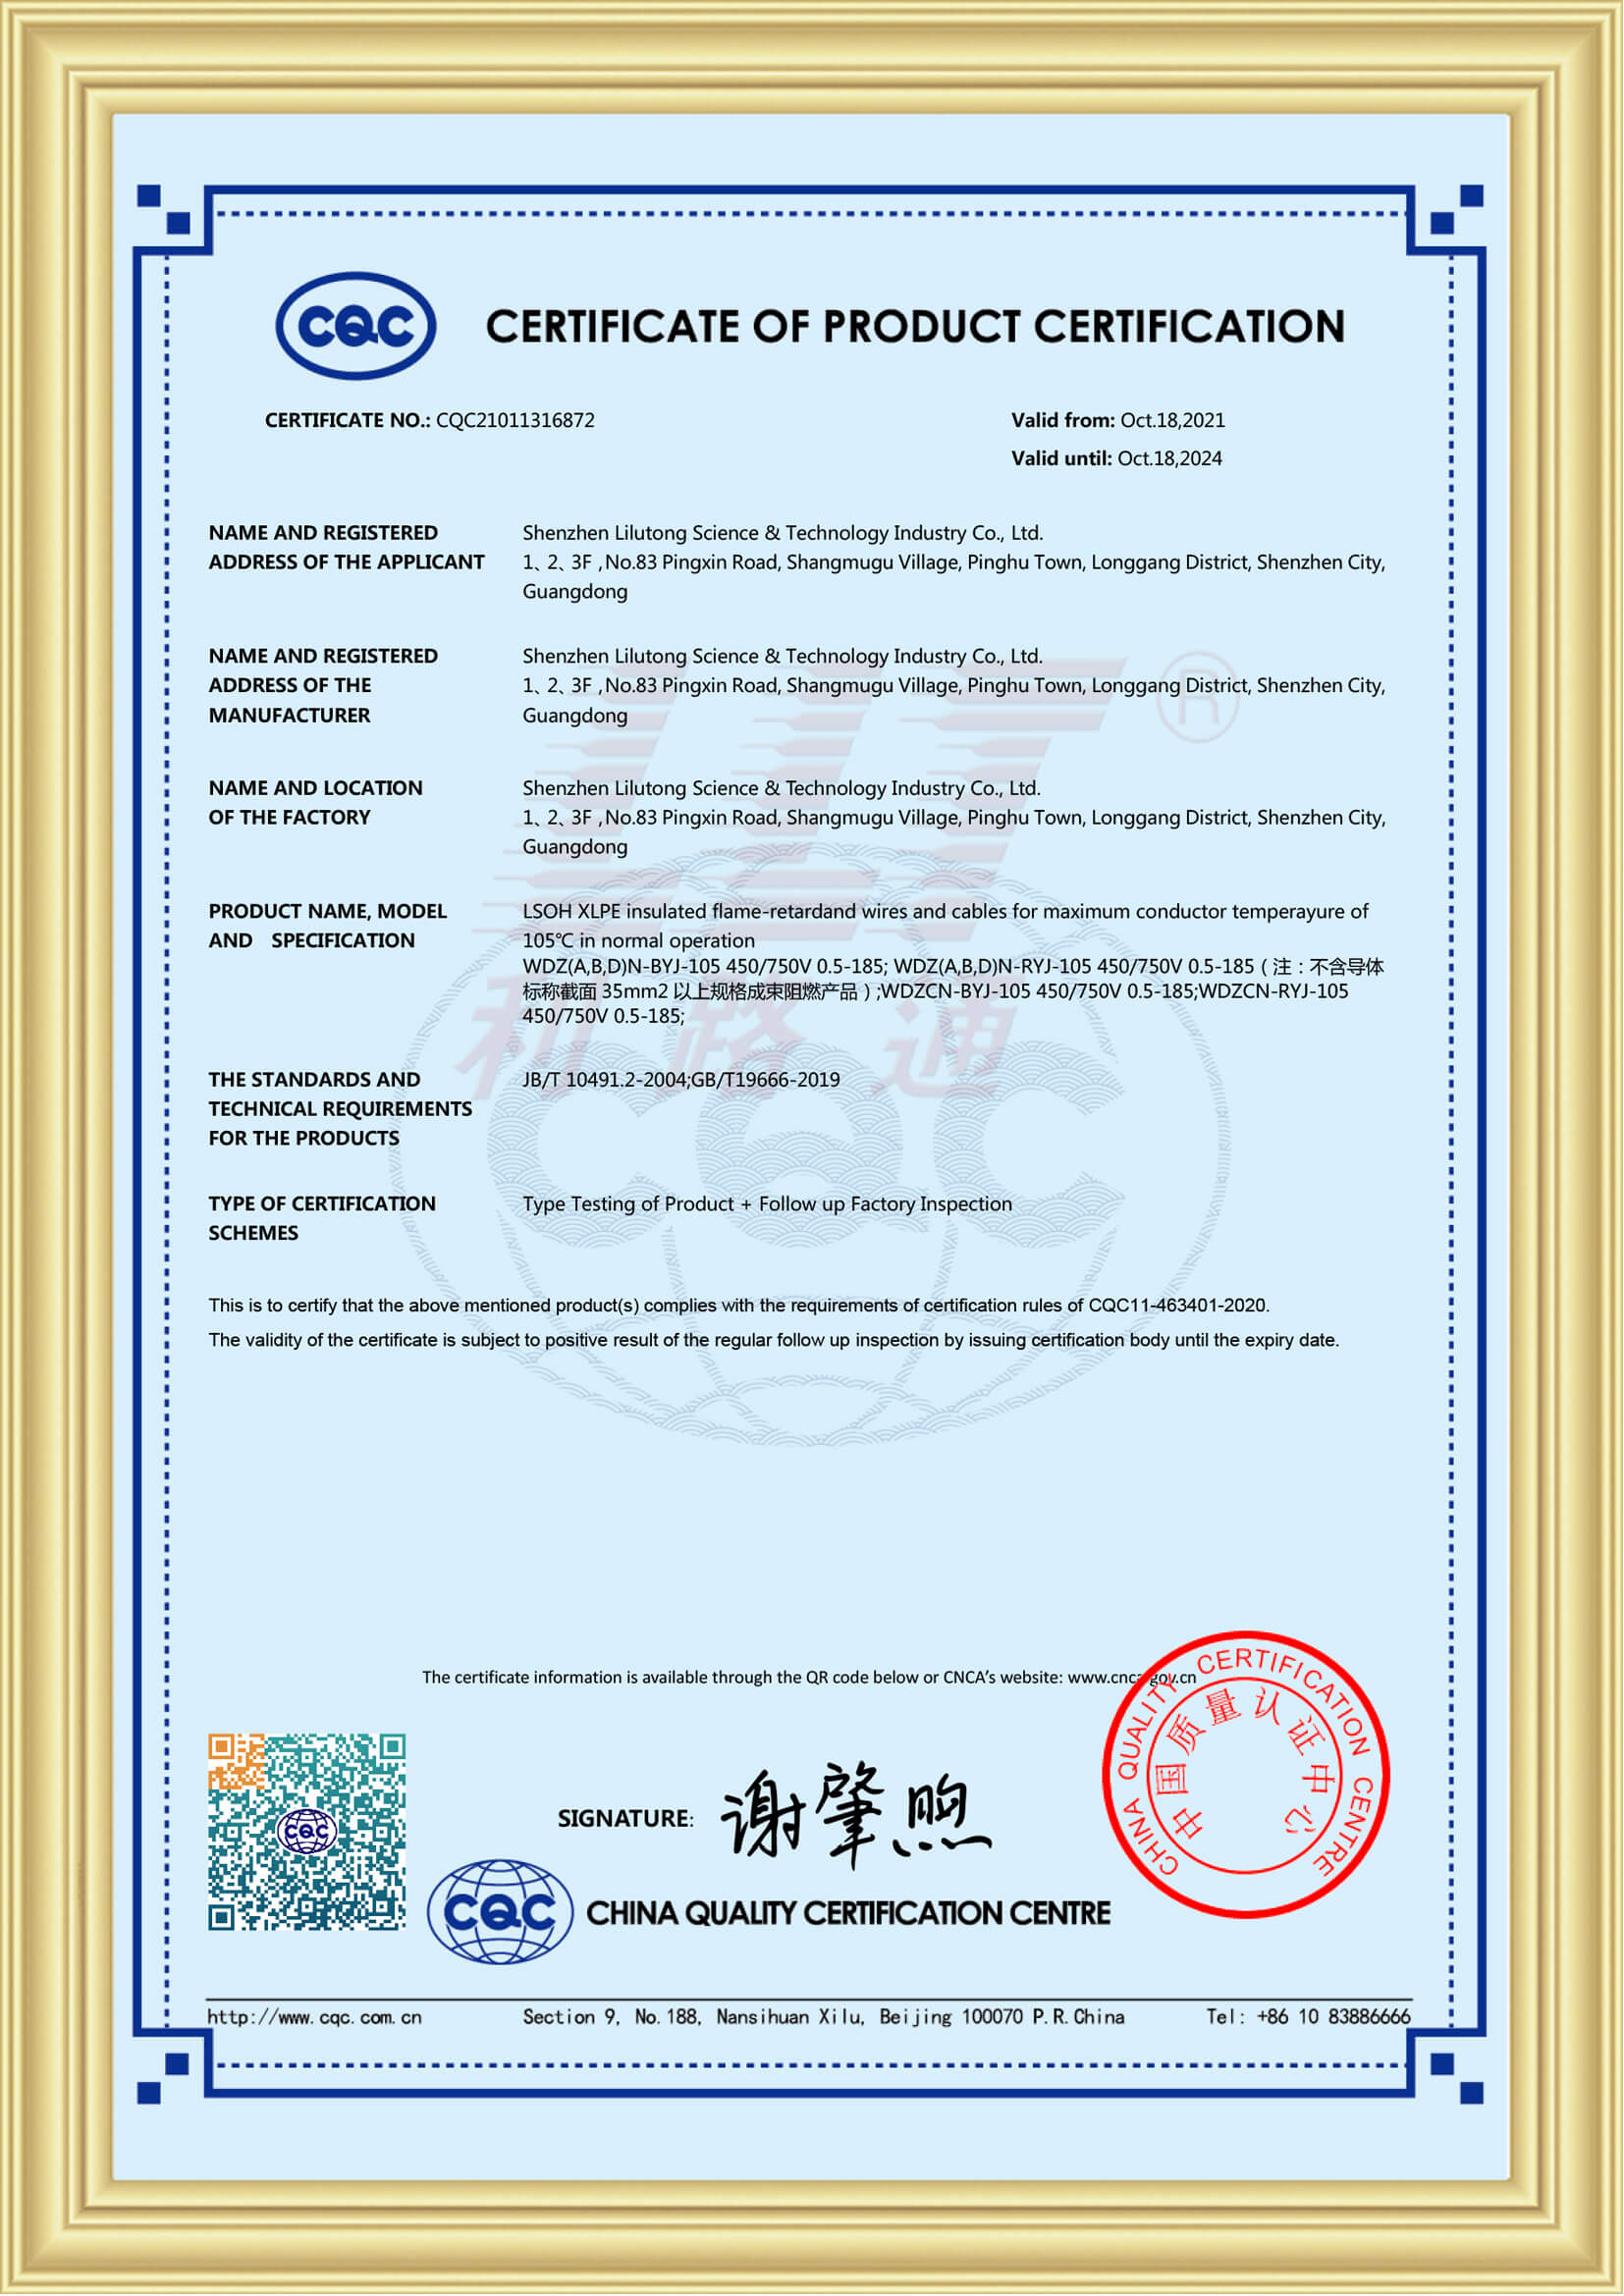 72CQC WDZ(A,B,D)N-BYJ-105 Cable quality certification